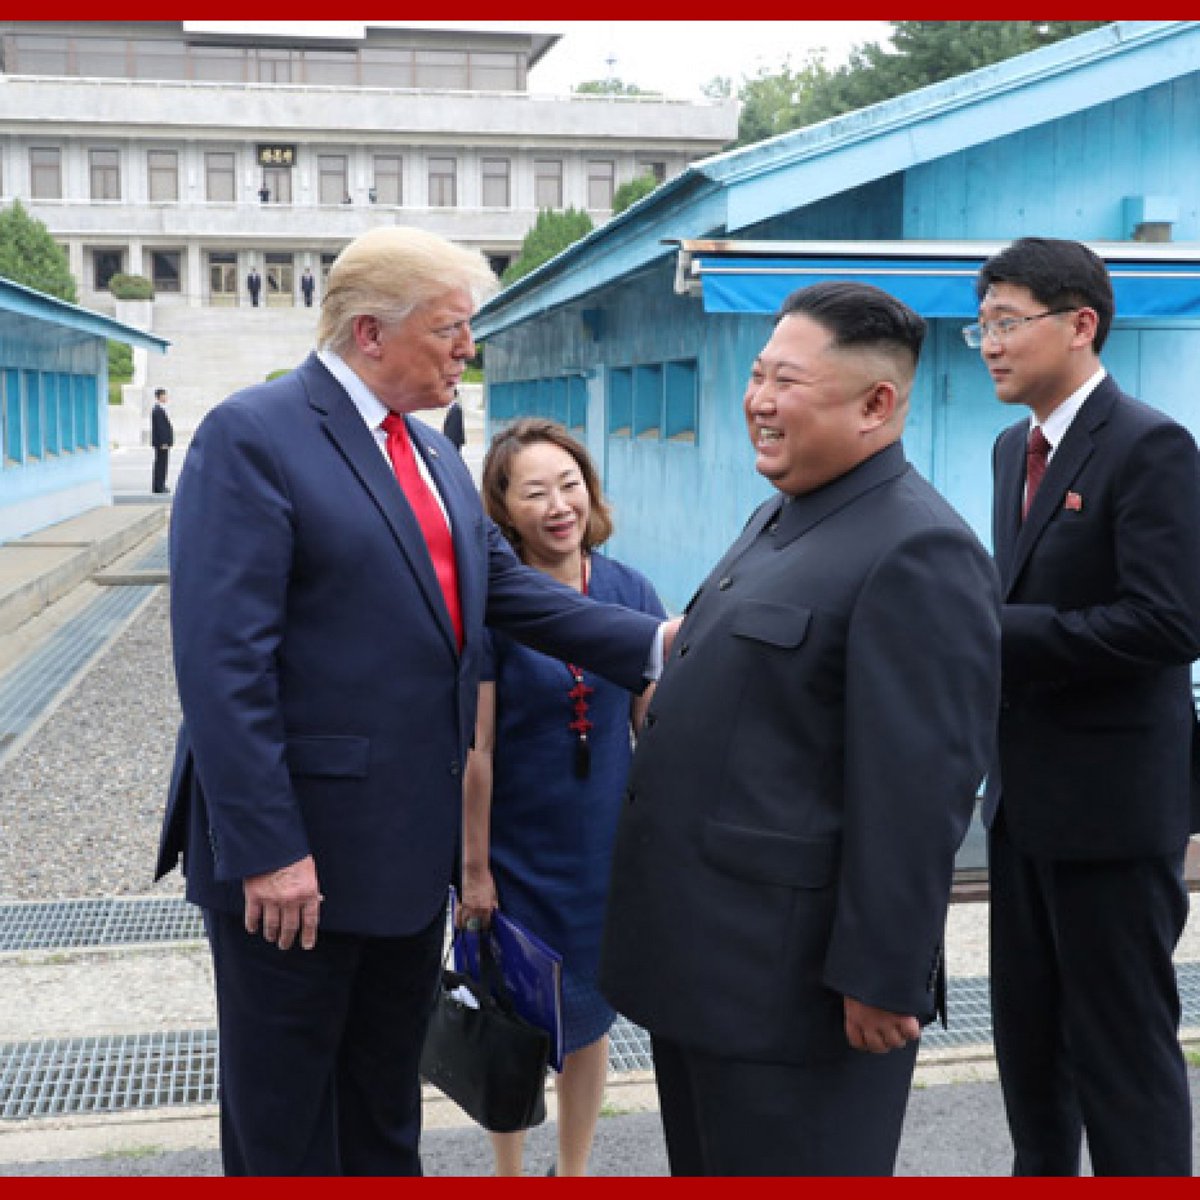 In his dealings with Kim Jong Un, Trump could not help but speak openly about how he wanted a country like North Korea where everyone was forced to worship him and dissent was met with deadly force.He said this openly and often. He desires an authoritarian state.14/